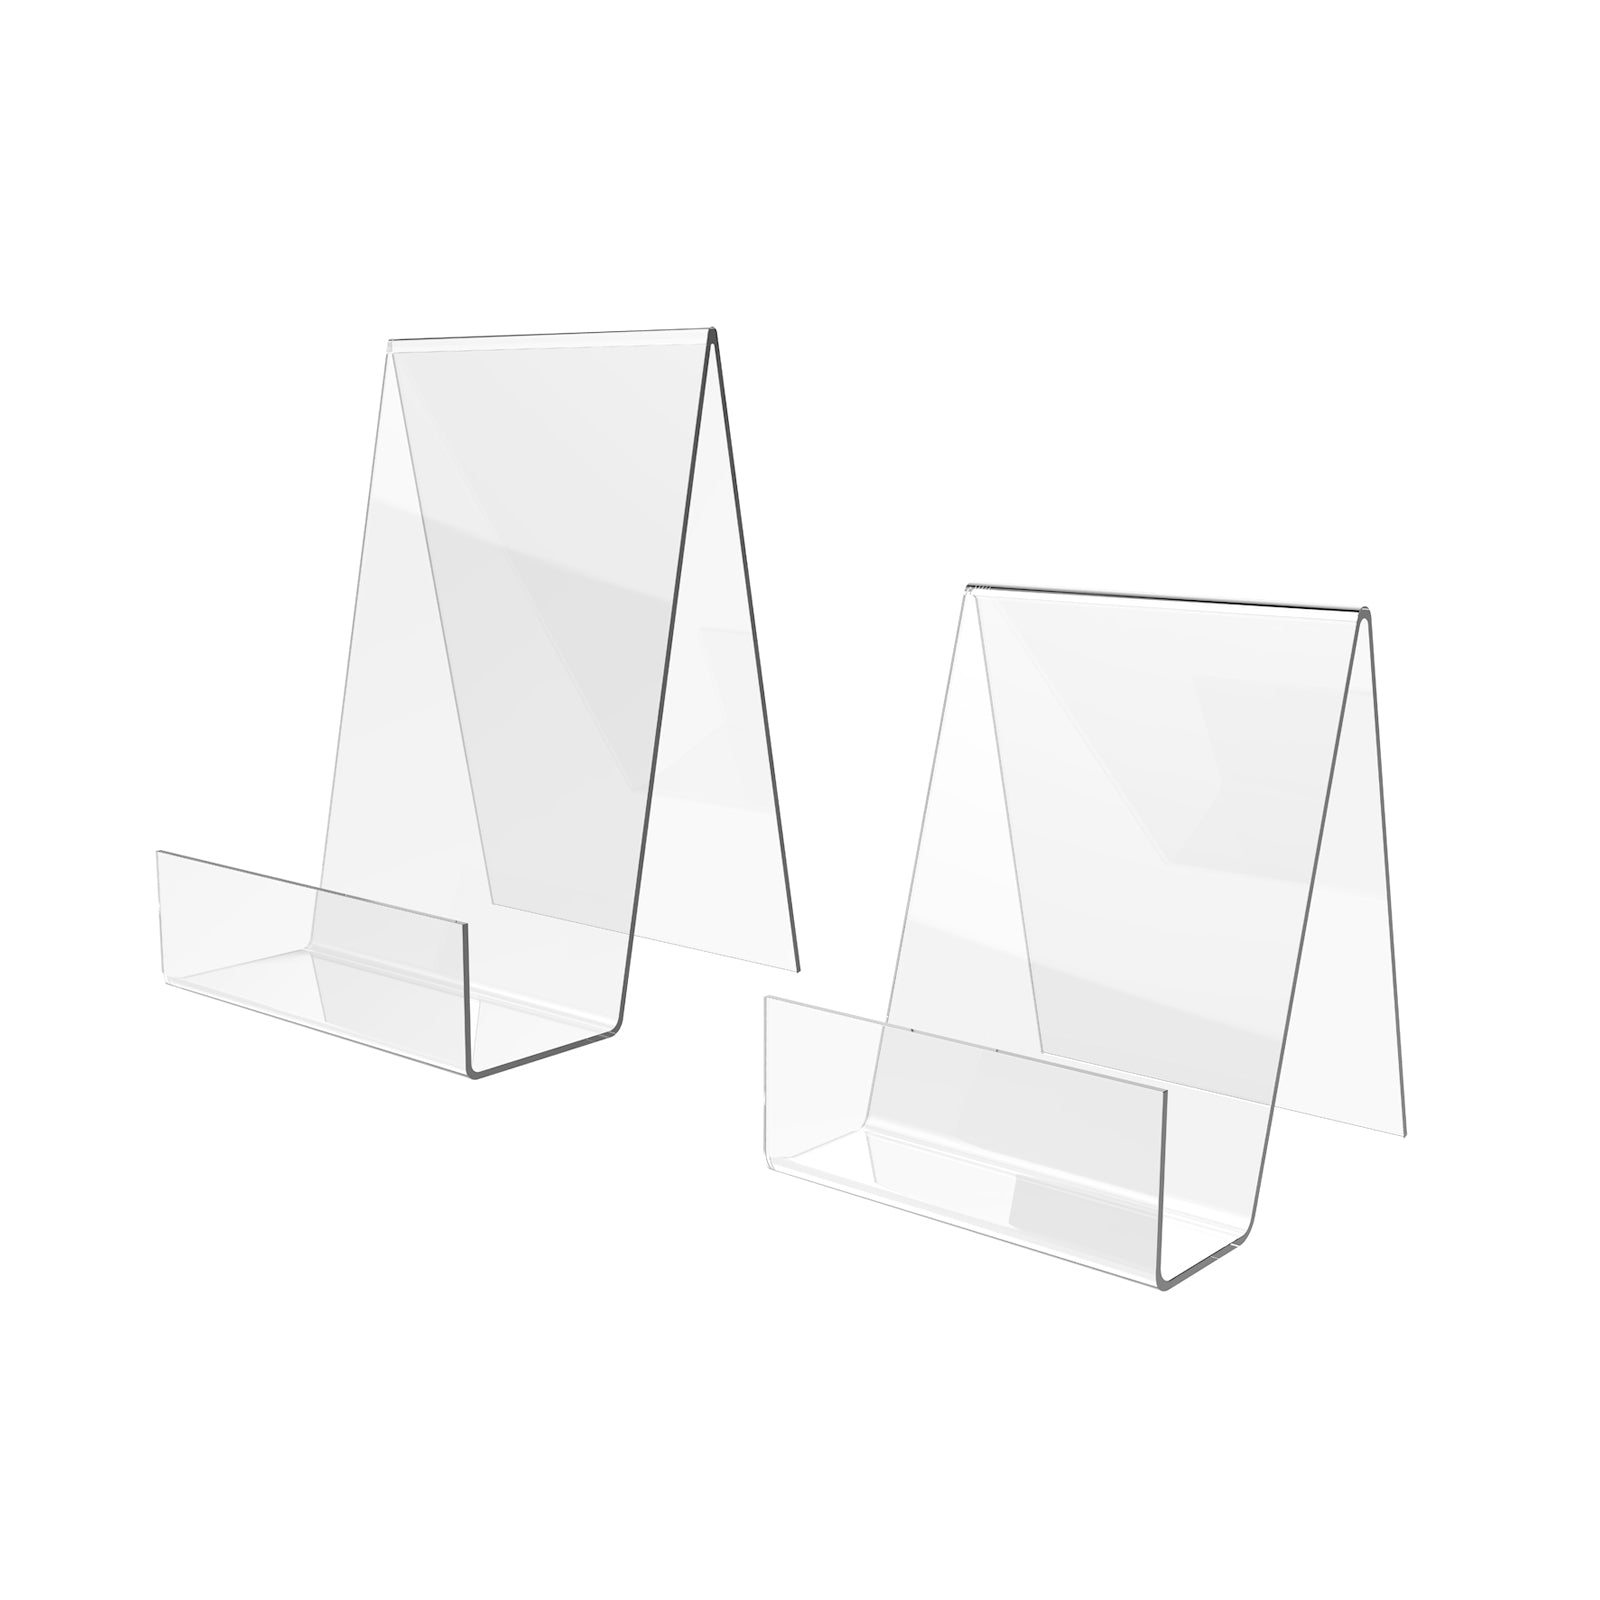  Boloyo Acrylic Book Stand with Ledge,6PC 6 Inch Clear